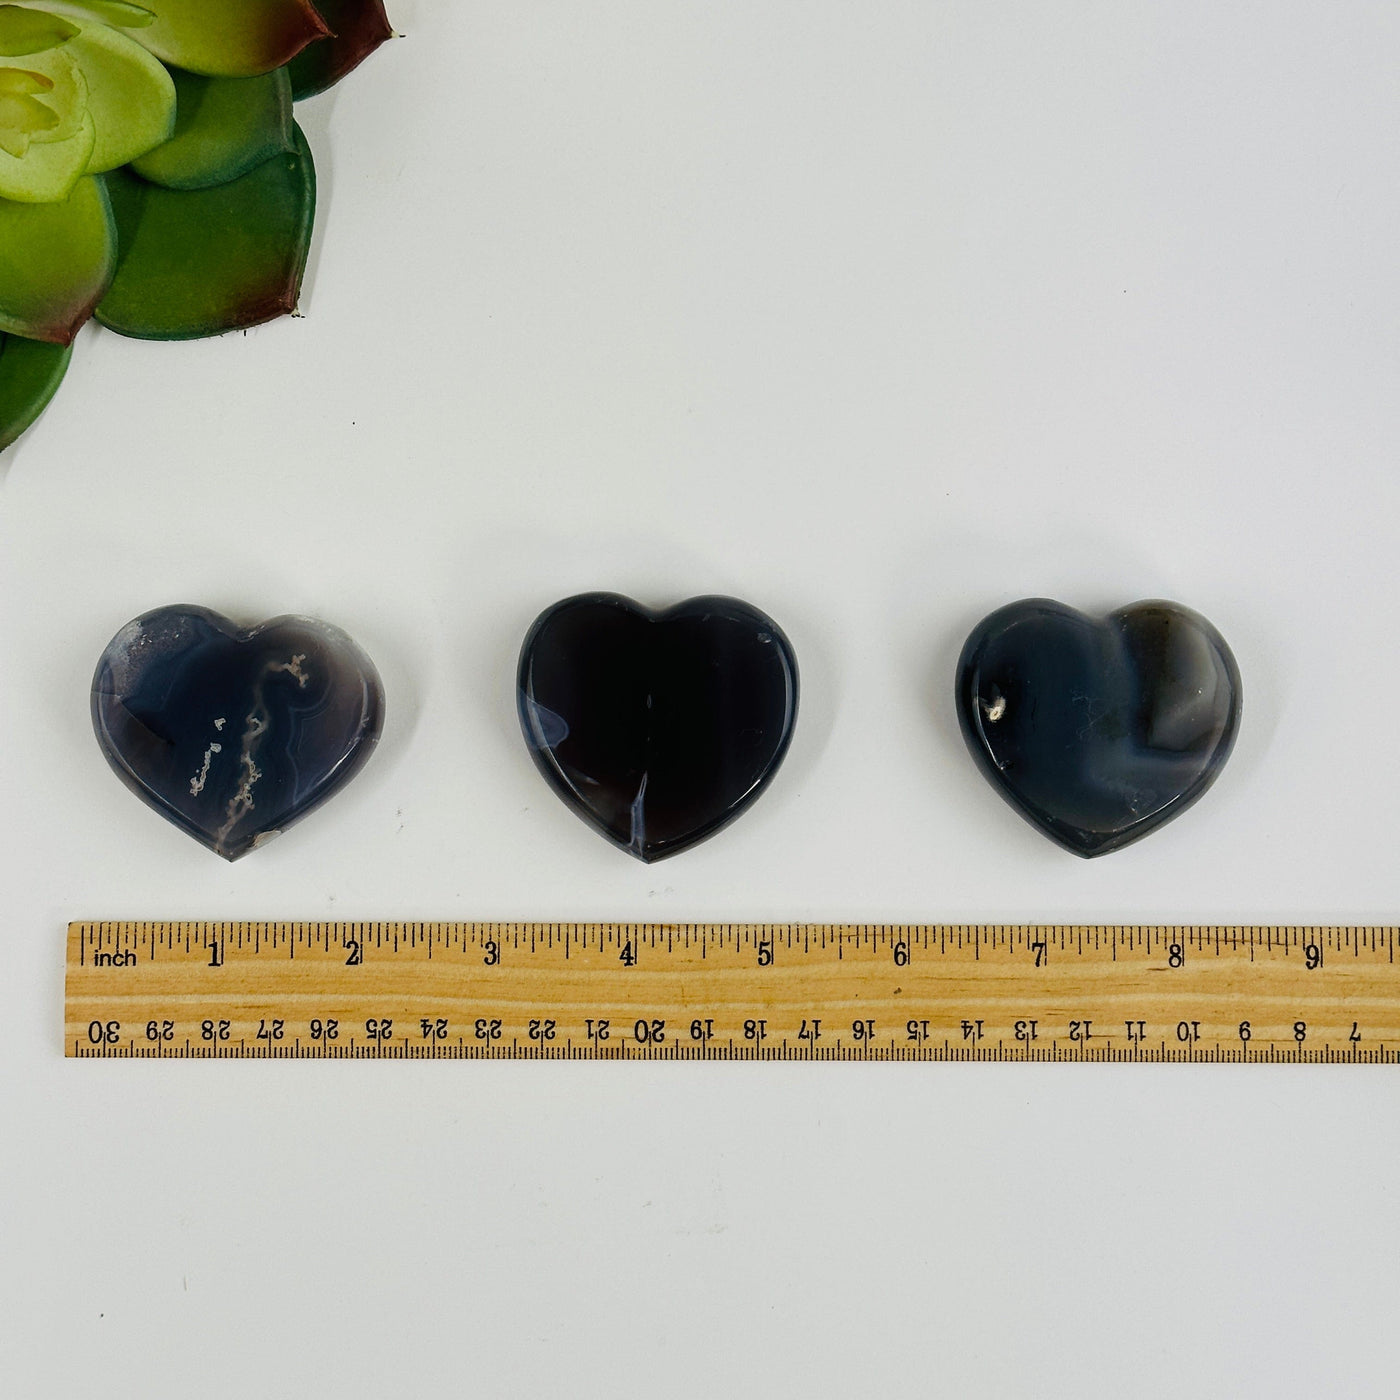 natural agate hears next to a ruler for size reference